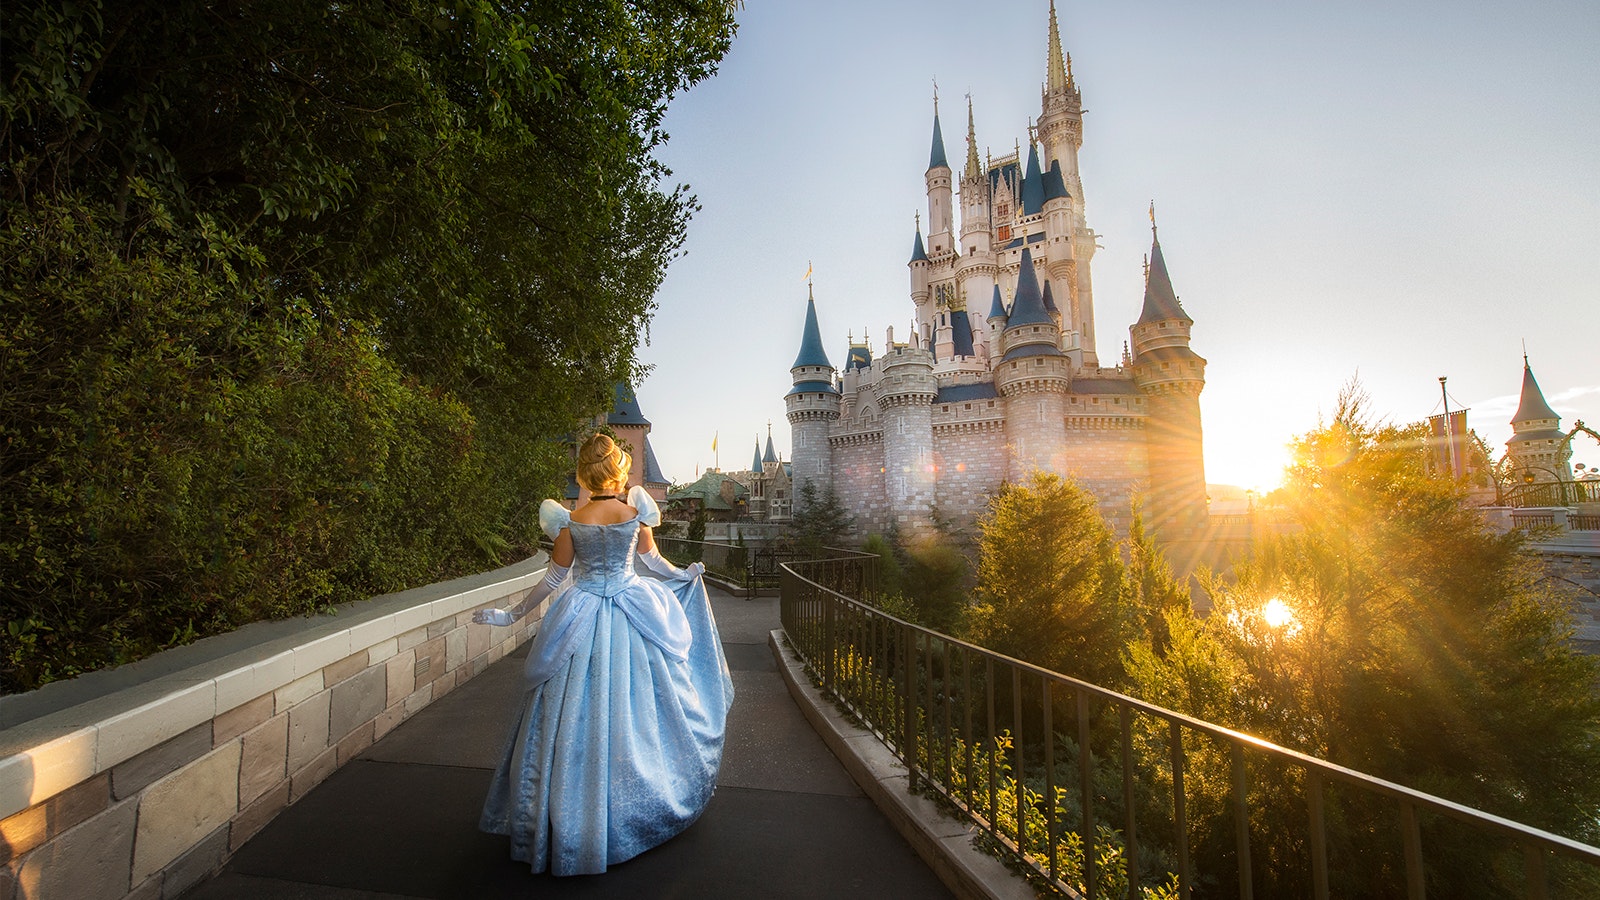 Here’s Your Chance to Stay in the Cinderella Castle Suite!